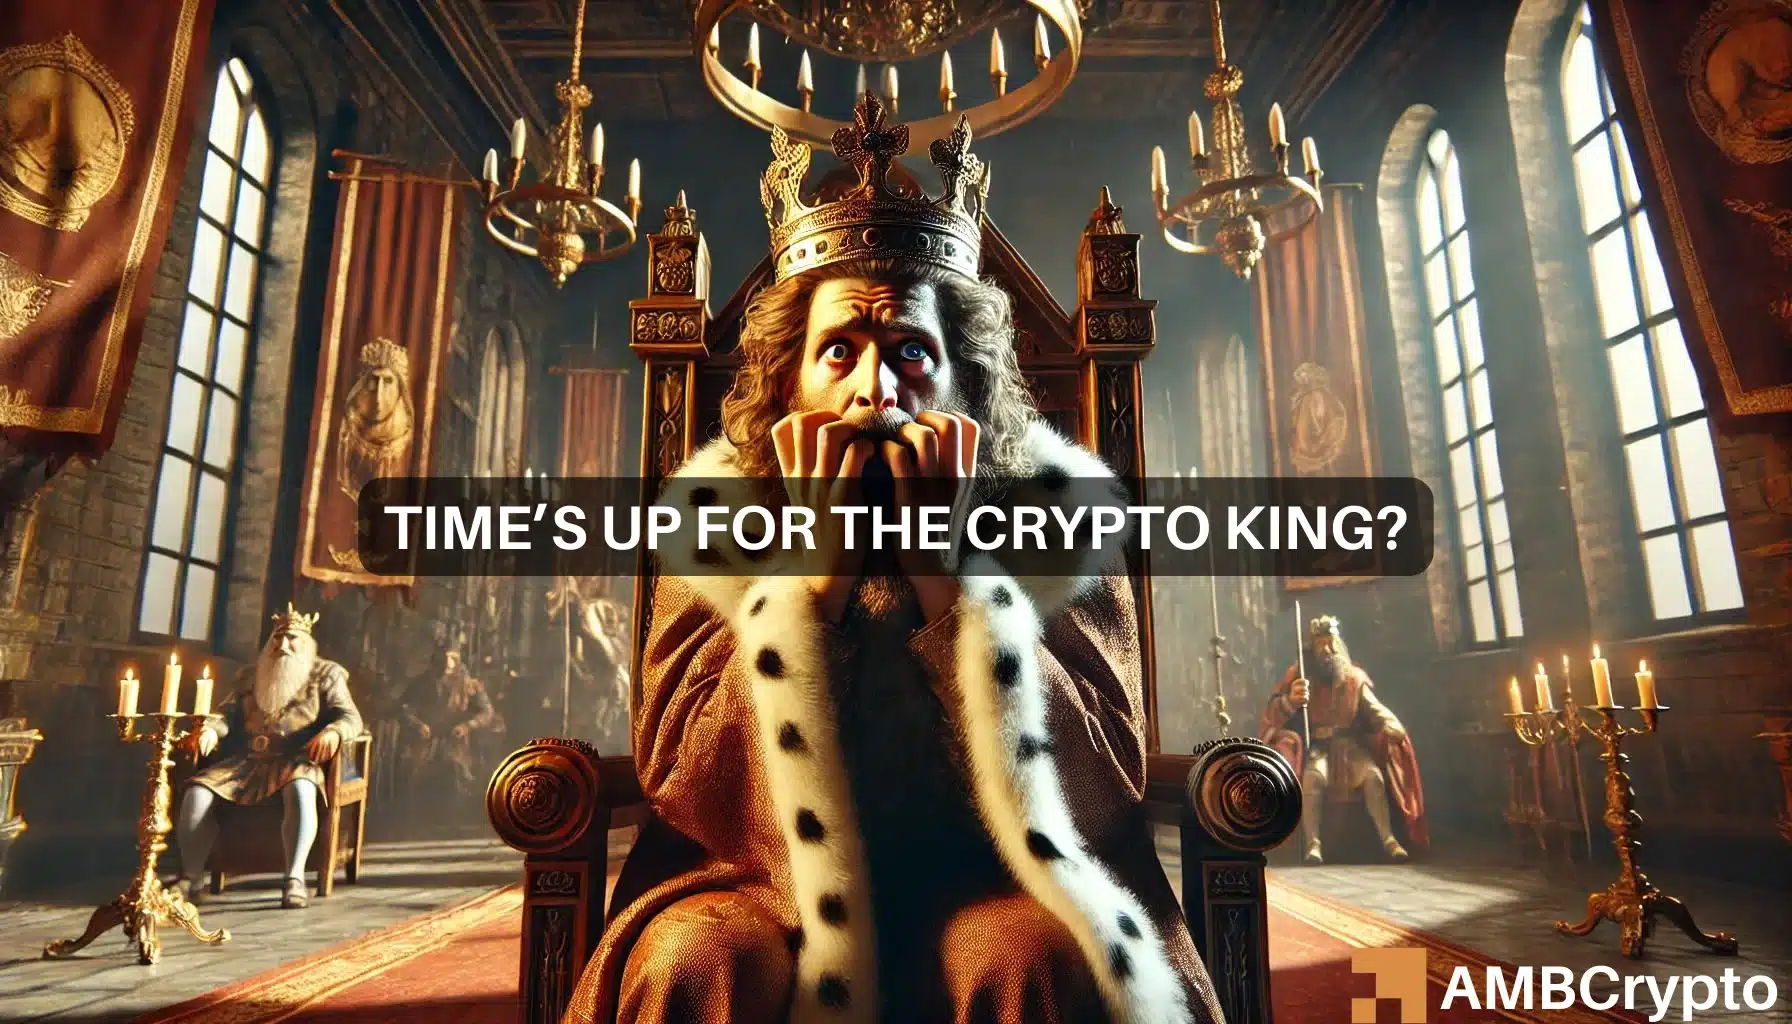 Ontario’s ‘Crypto King’ faces calls to repay millions in bankruptcy proceedings